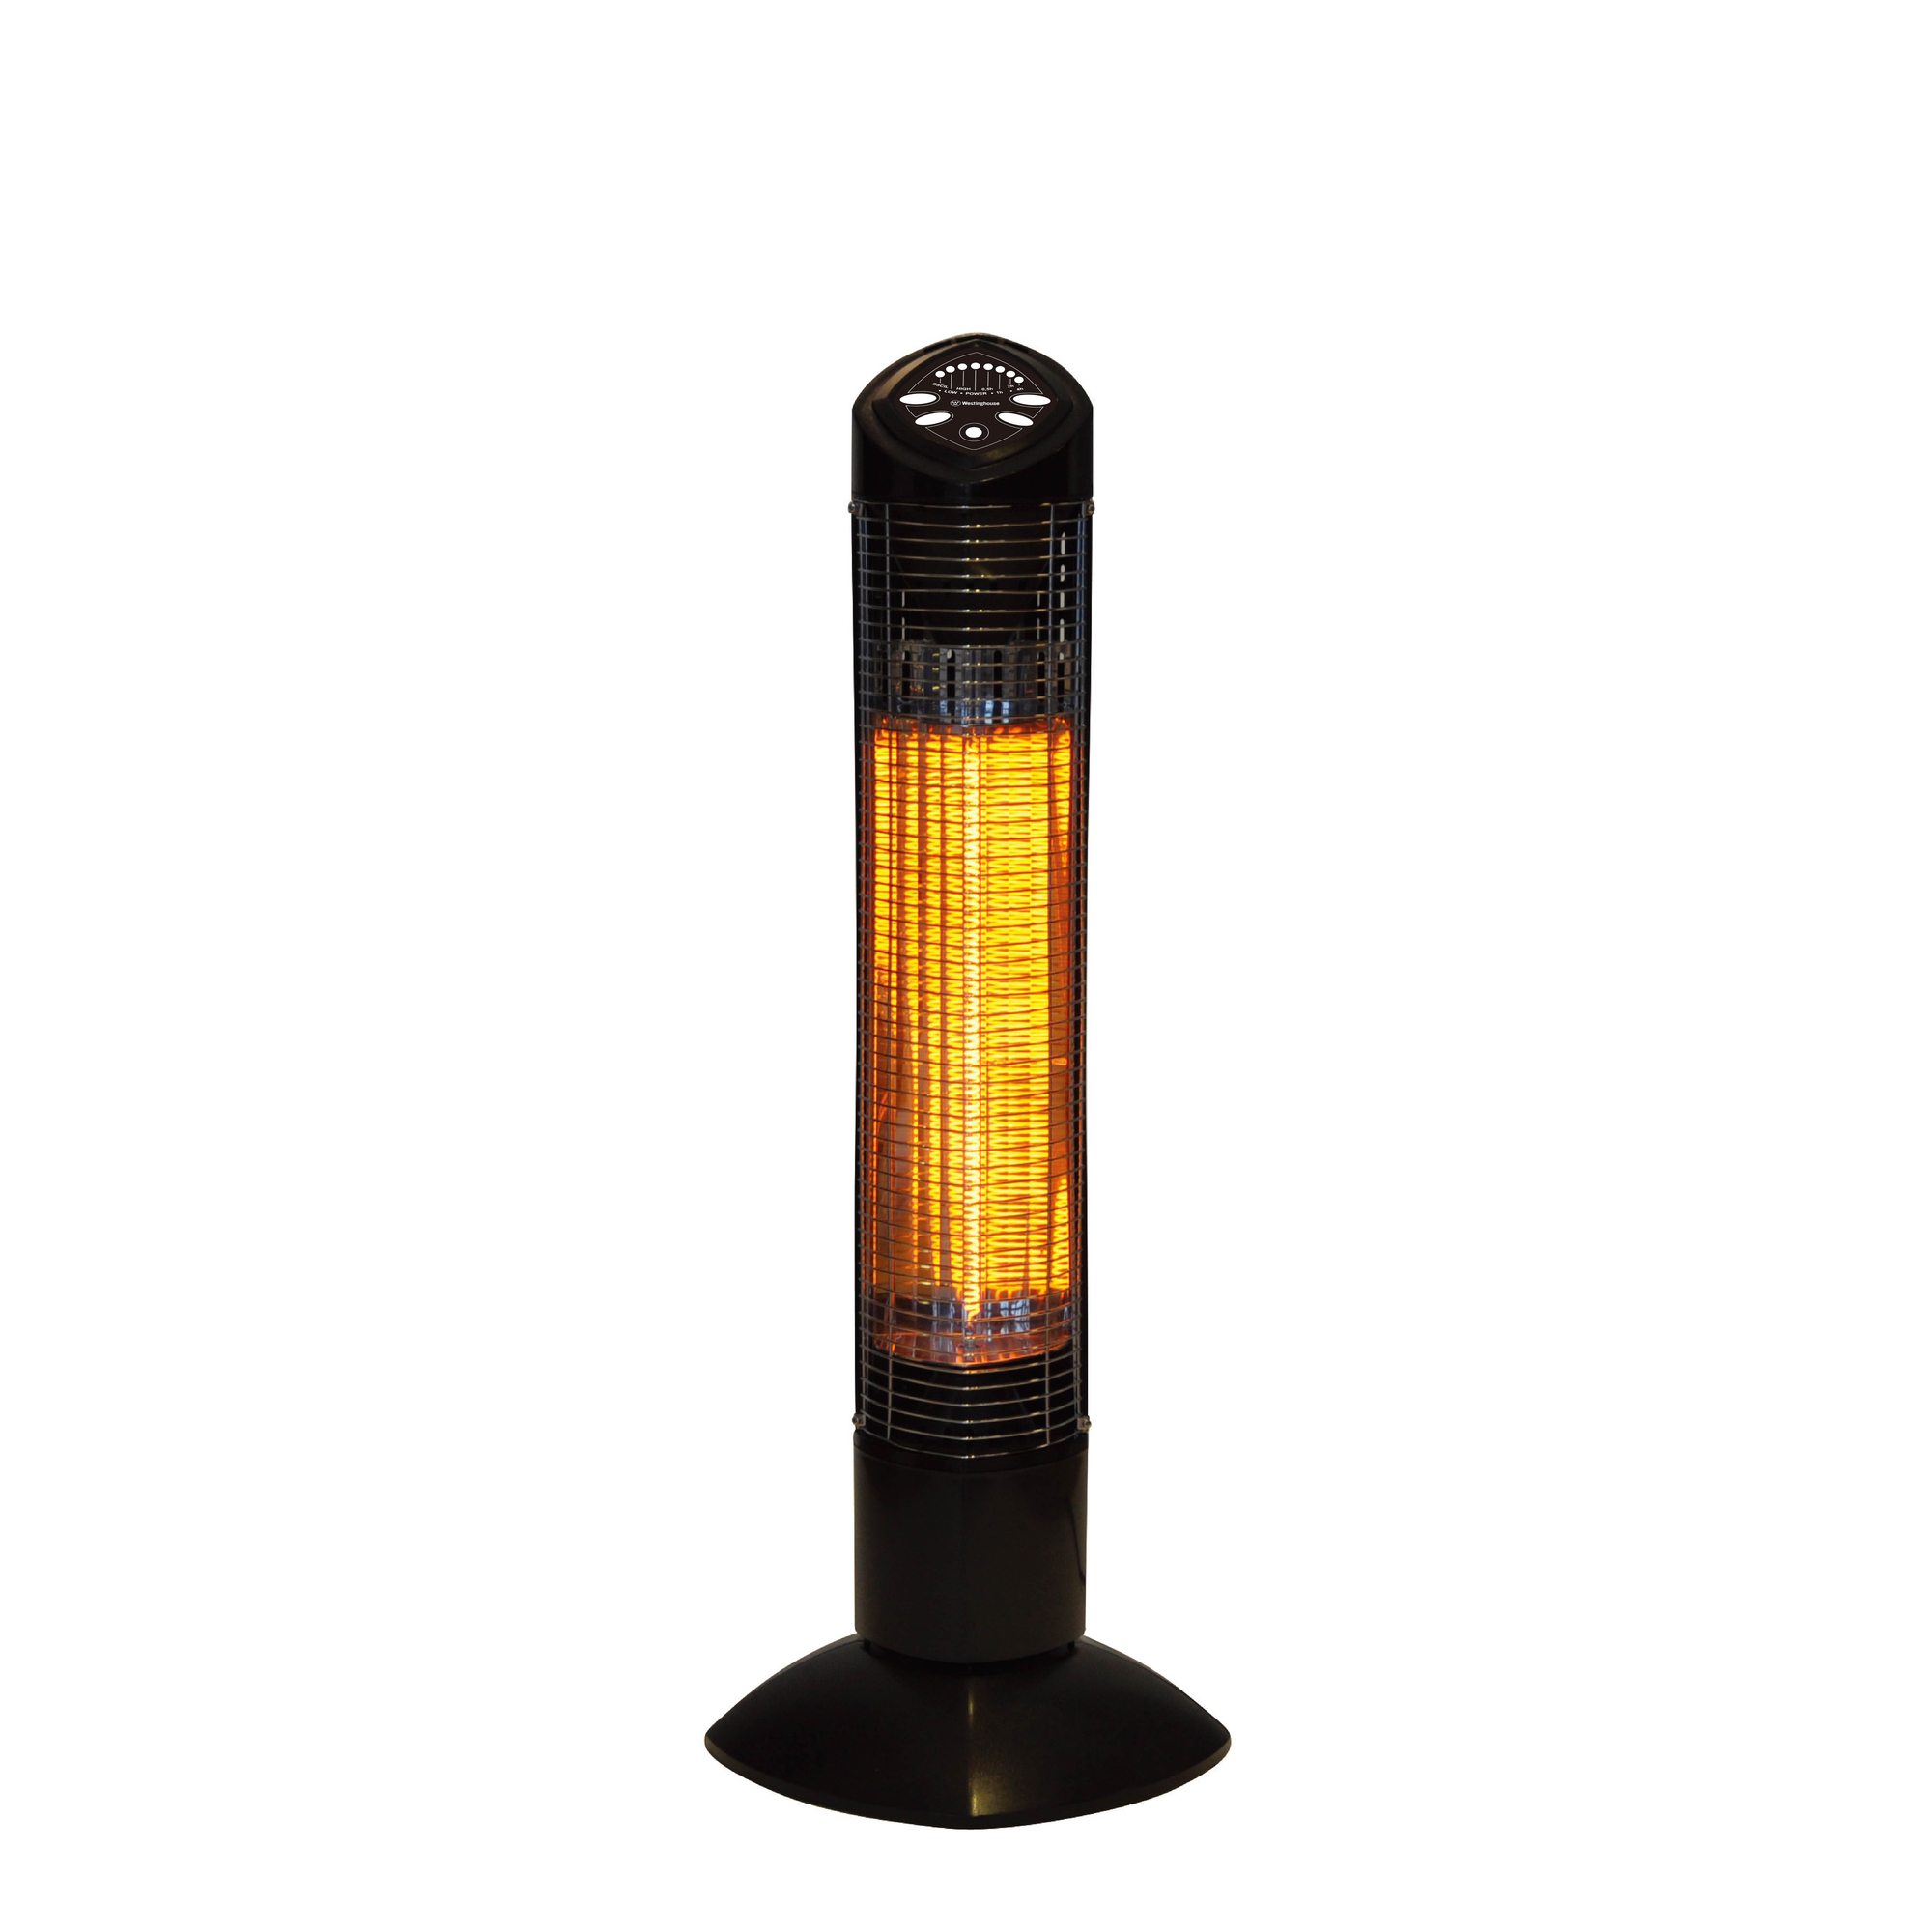 Westinghouse, Portable Oscillating Patio Heater, Model WES31-1200